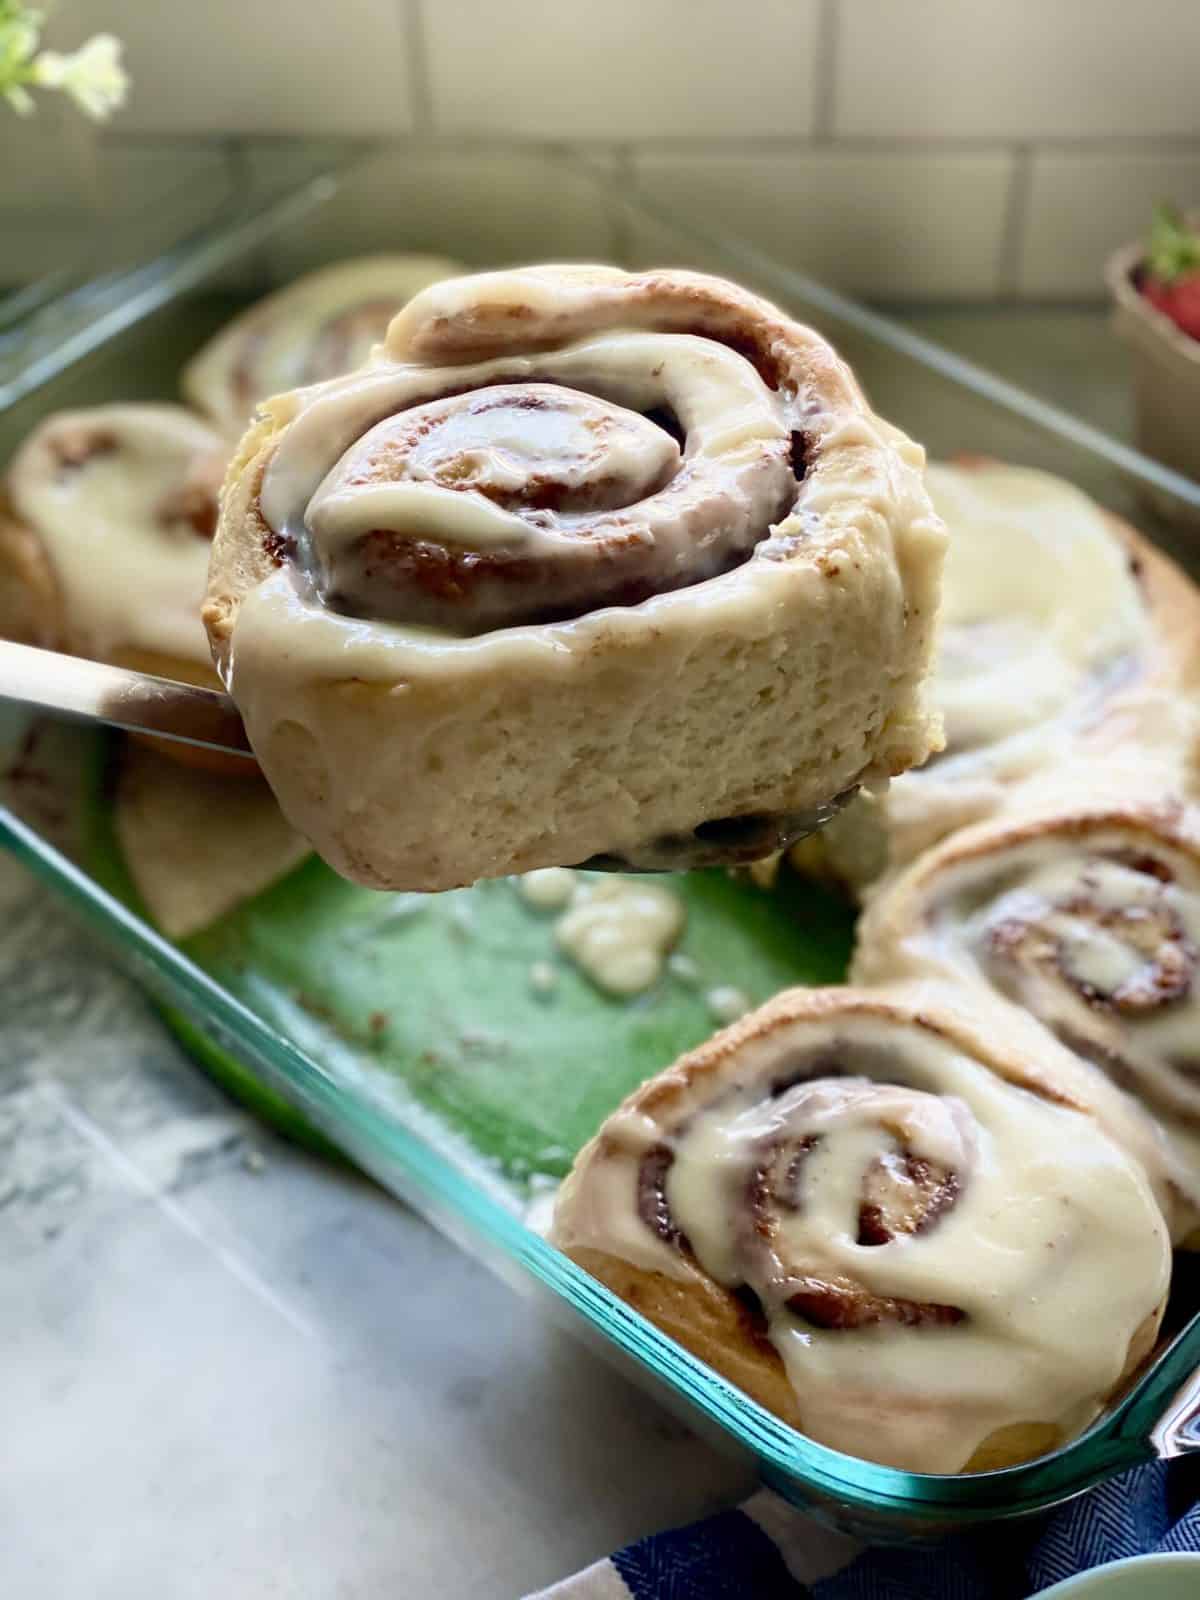 Spatula holding a cinnamon roll over a glass tray.